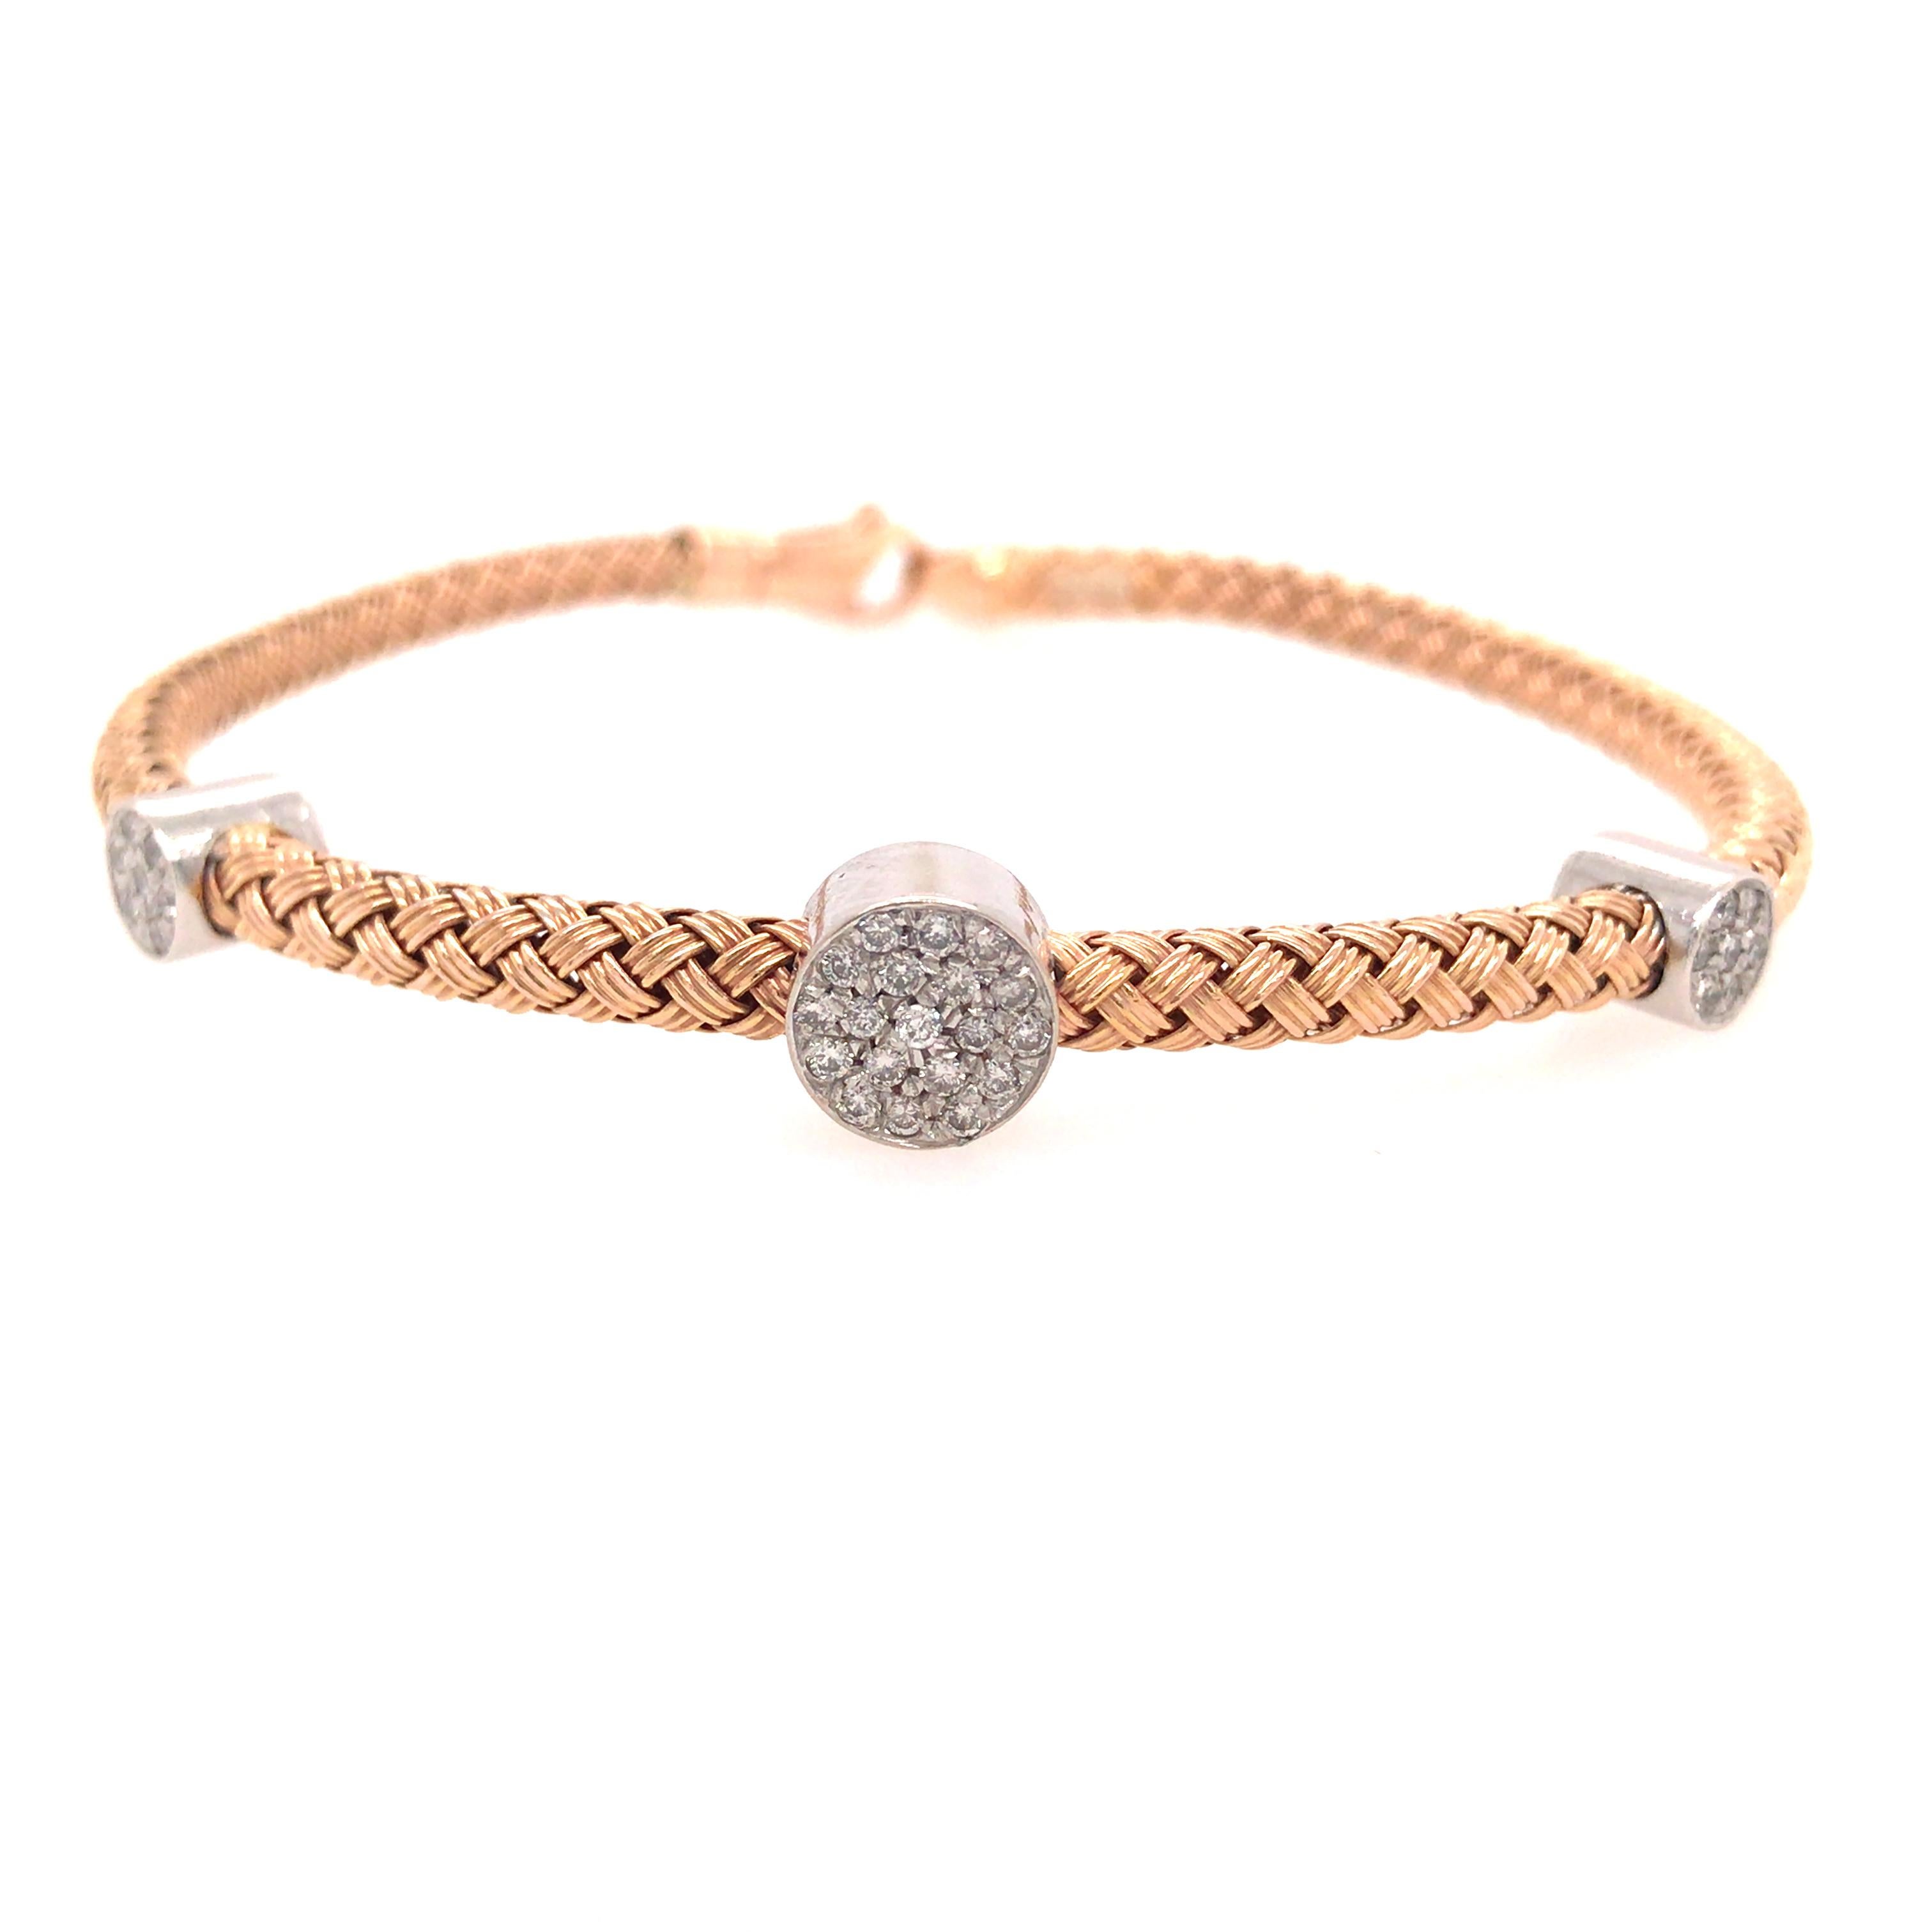 Diamond Station Bracelet in 14K Rose Gold and White Gold.  Round Brilliant Cut Diamonds weighing 0.38 carat total weight, G-H in color and VS-SI in clarity are expertly set in (3) white gold stations.  The Bracelet measures 6 1/2 inch in length and